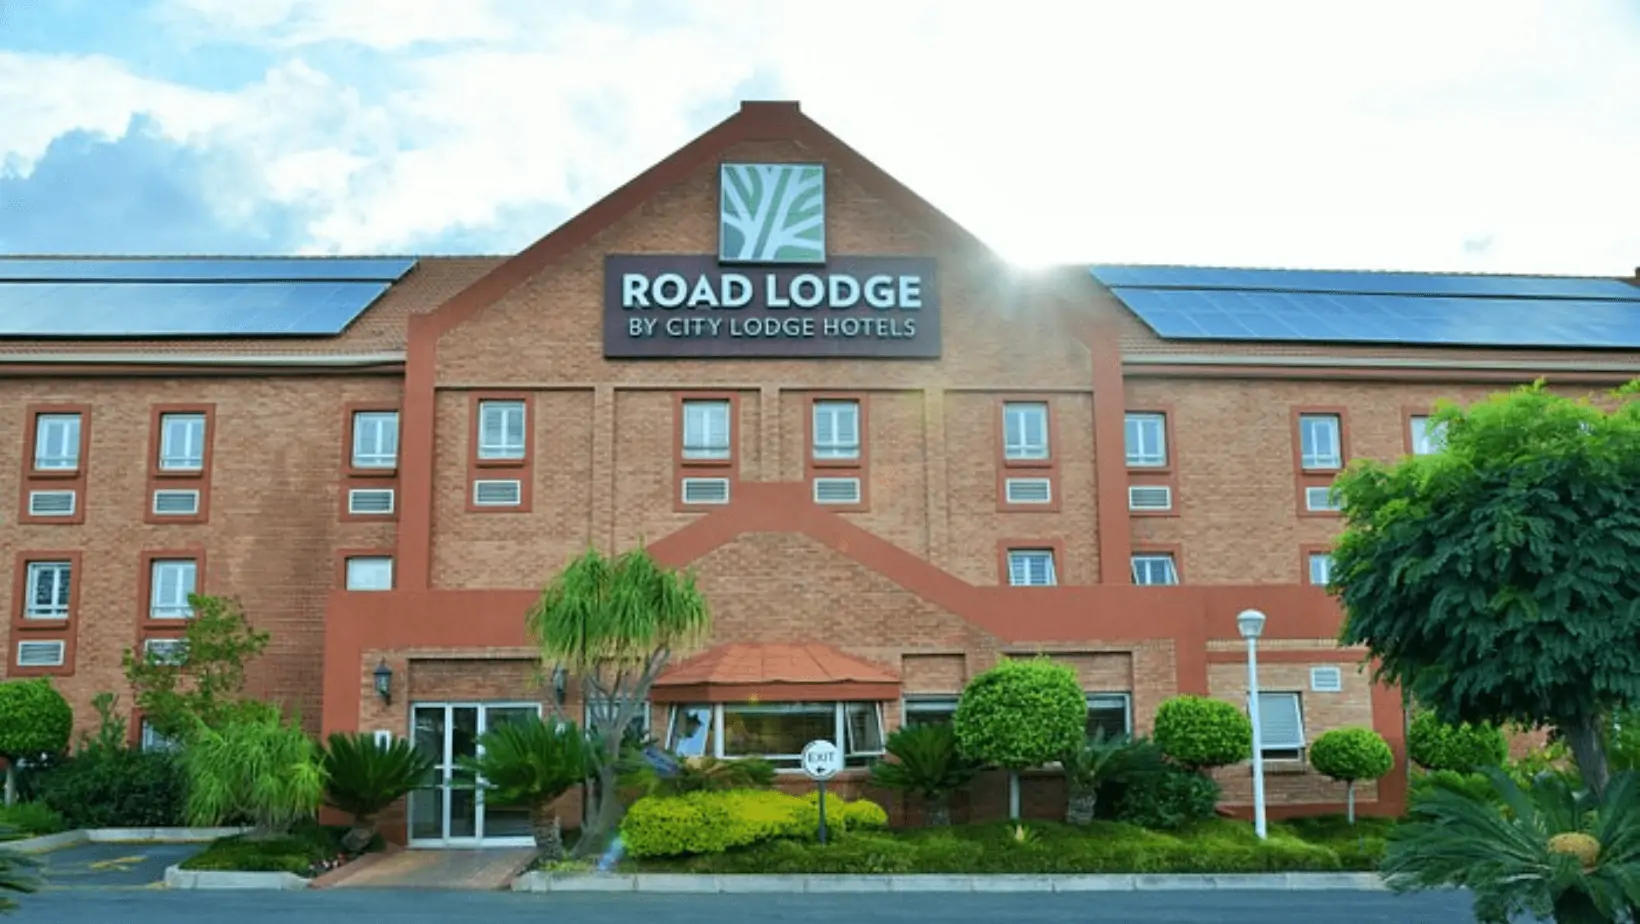 City Lodge Hotels Reports Strong Recovery with Robust Financial Performance